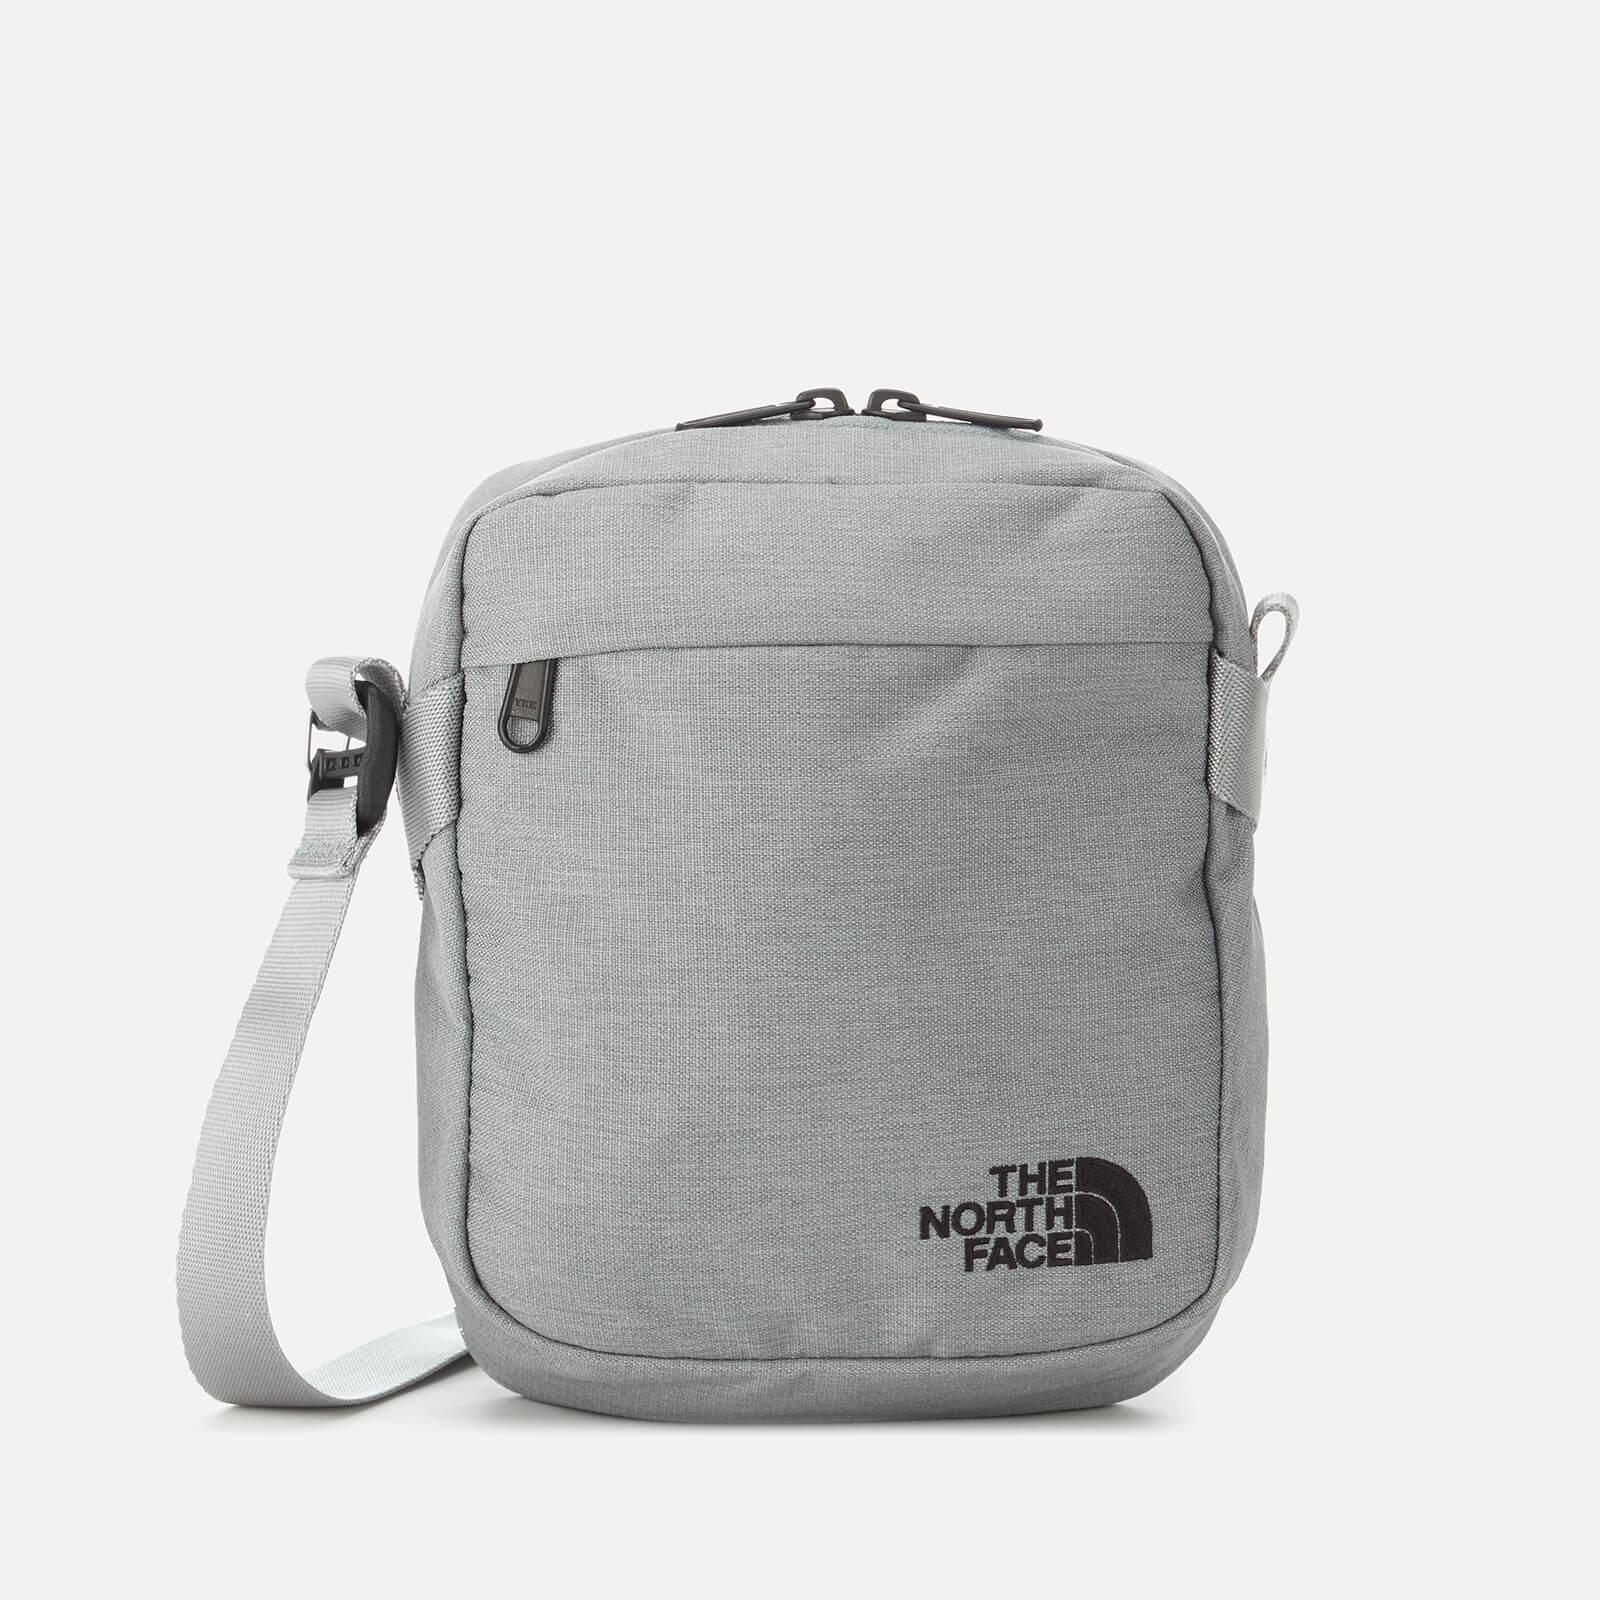 The North Face Convertible Shoulder Bag in Grey | Lyst Canada